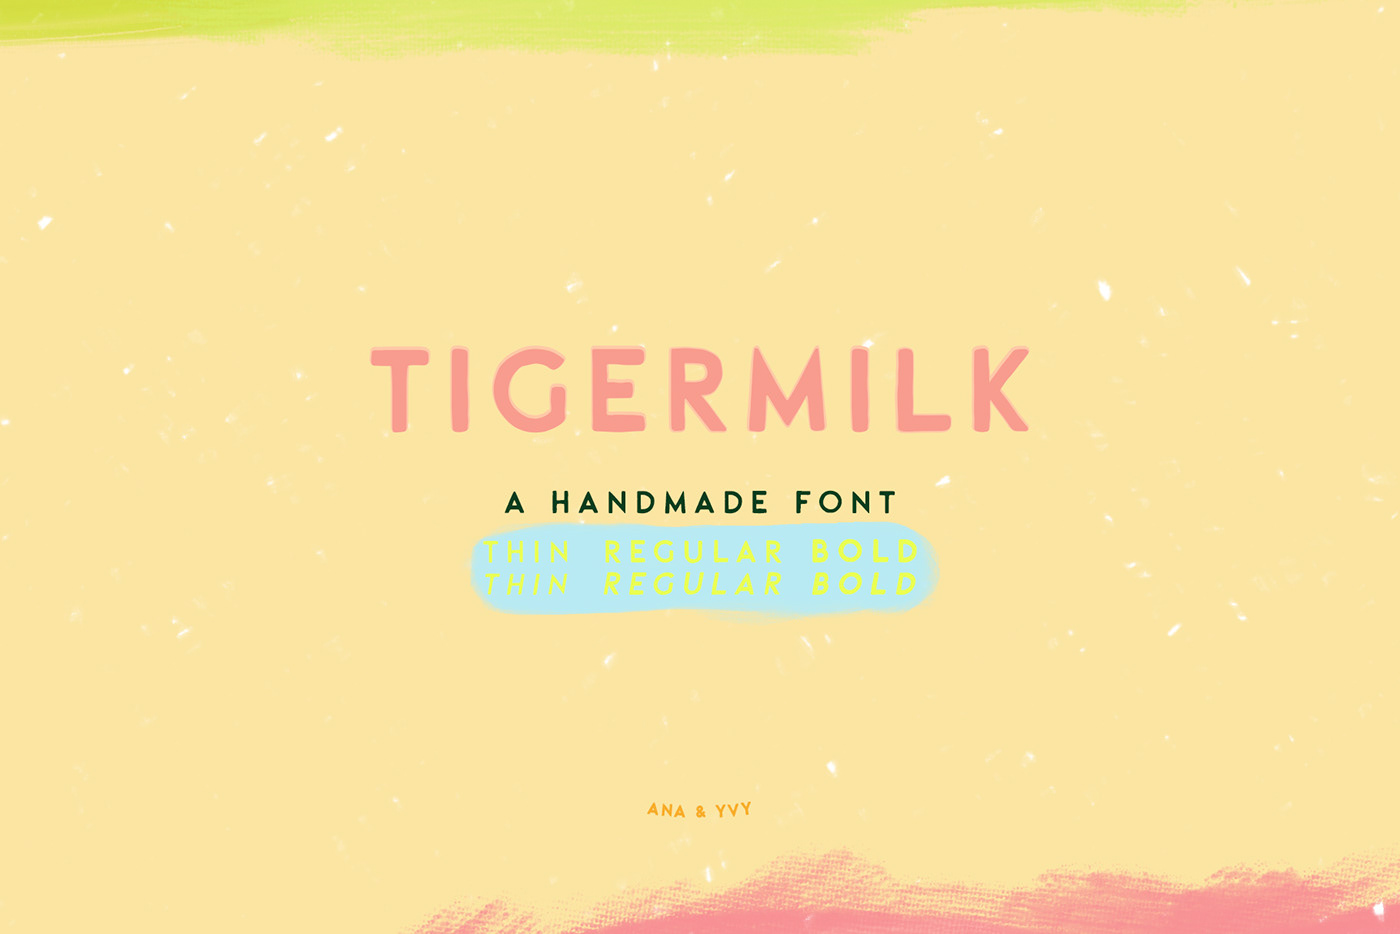 Display font font design fonts lettering type type design Typeface typo typography  